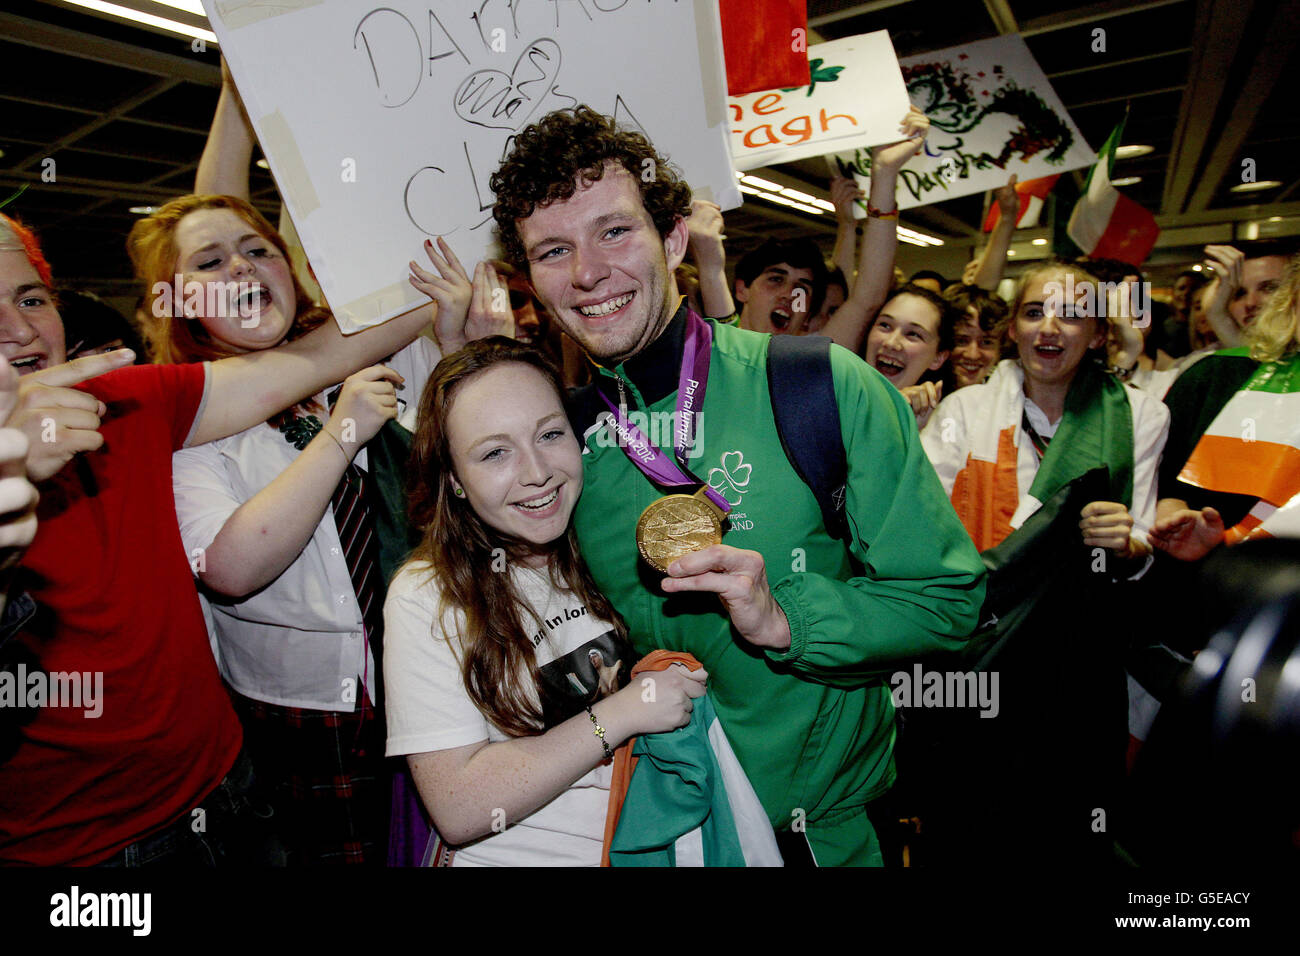 Irish Athlete and gold medal winner Darragh McDonald arrives back into Dublin Airport with his girlfriend Clara Peters after the London 2012 Paralympic Games to a massive welcome after the team's fantastic medal haul at the games. Stock Photo